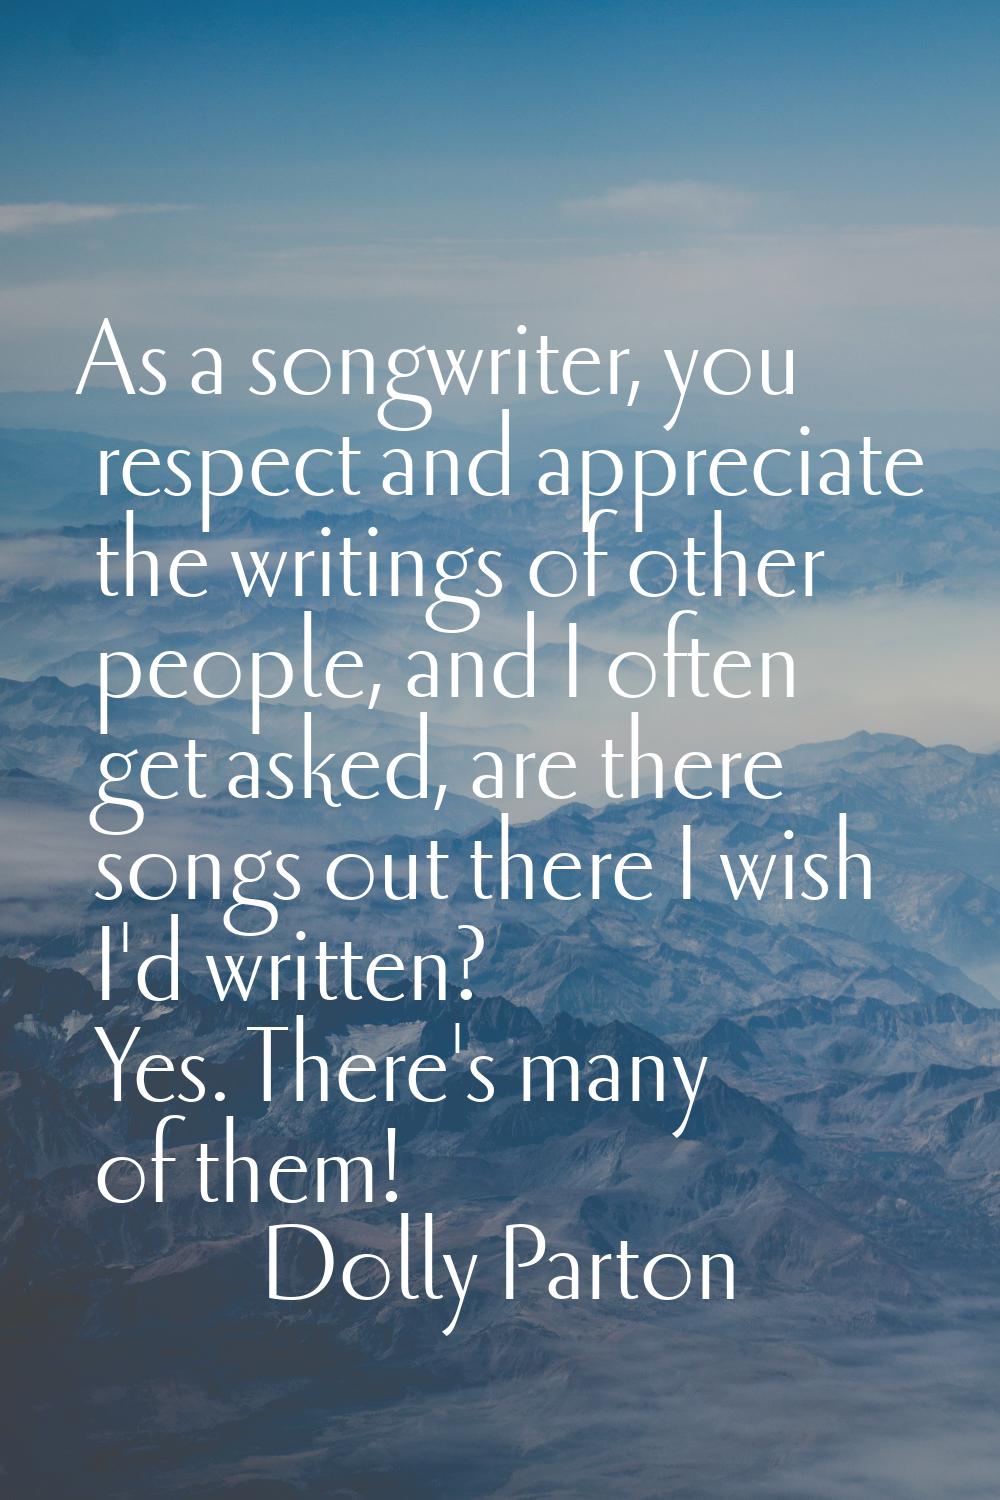 As a songwriter, you respect and appreciate the writings of other people, and I often get asked, ar